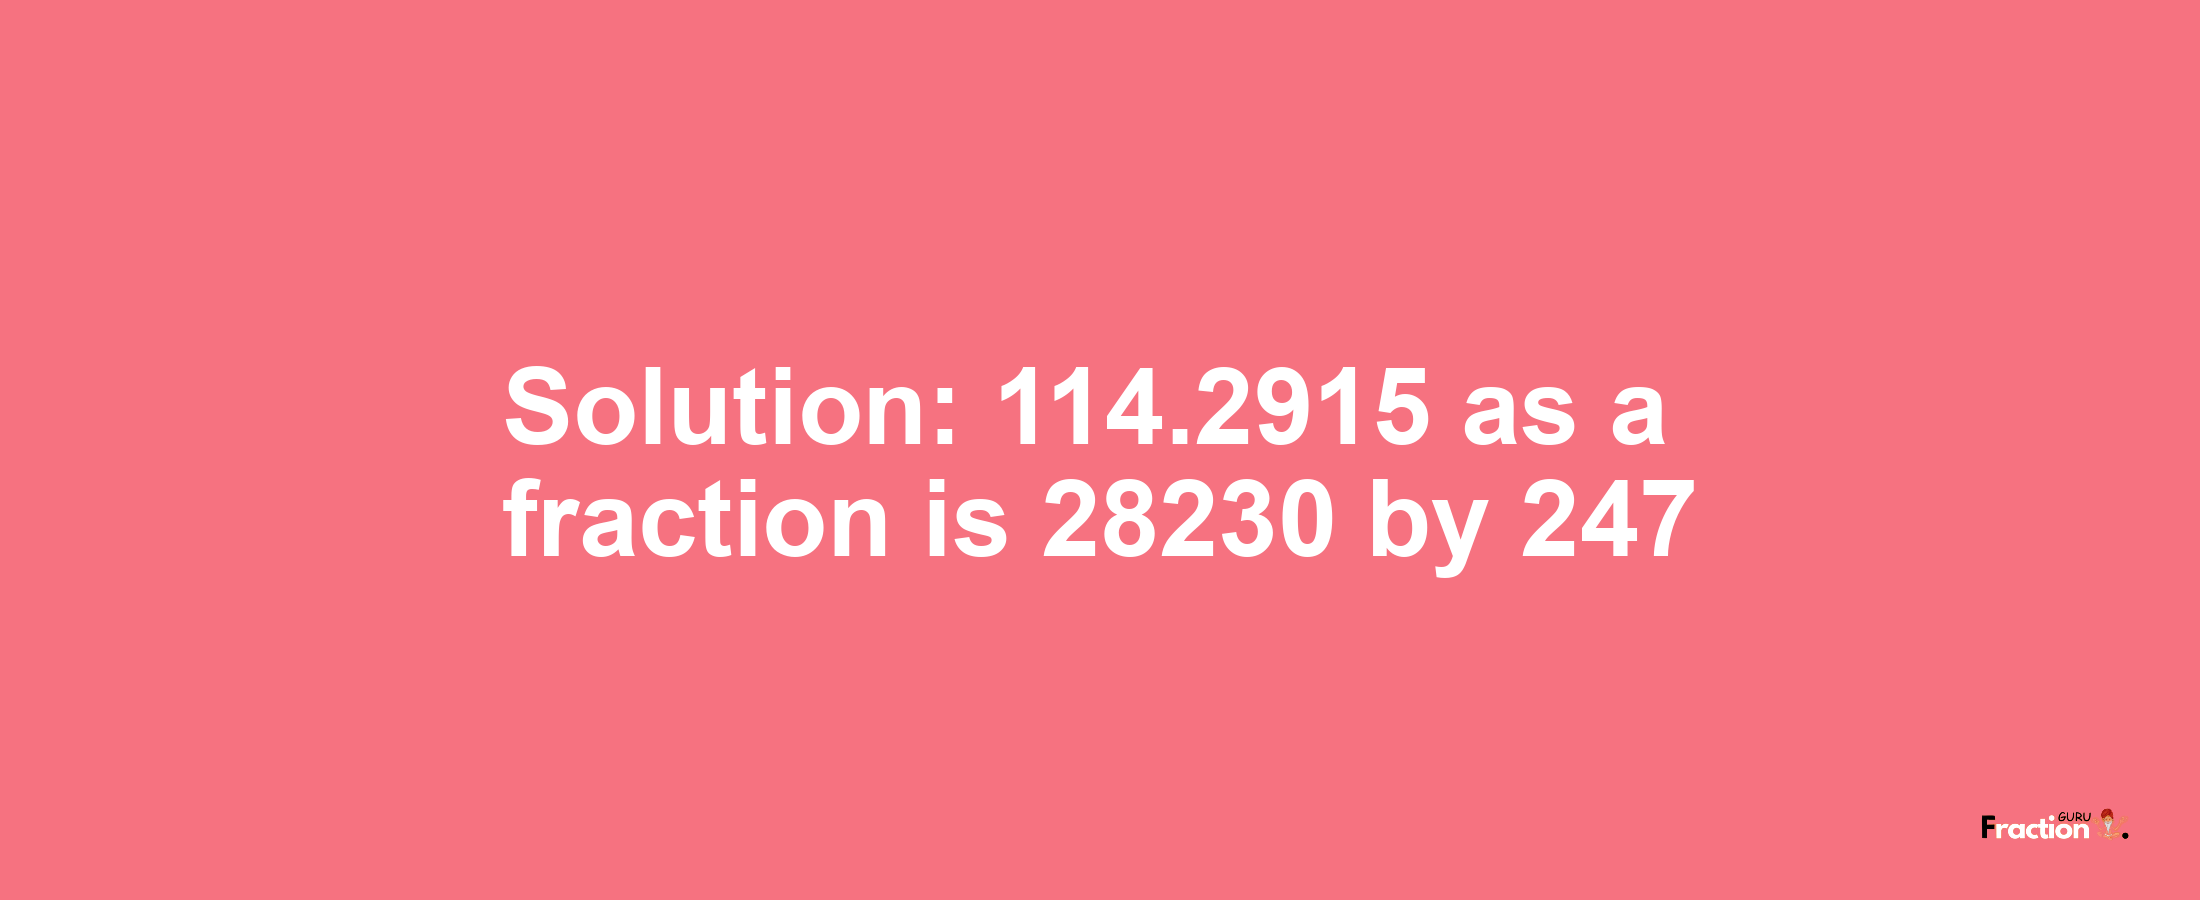 Solution:114.2915 as a fraction is 28230/247